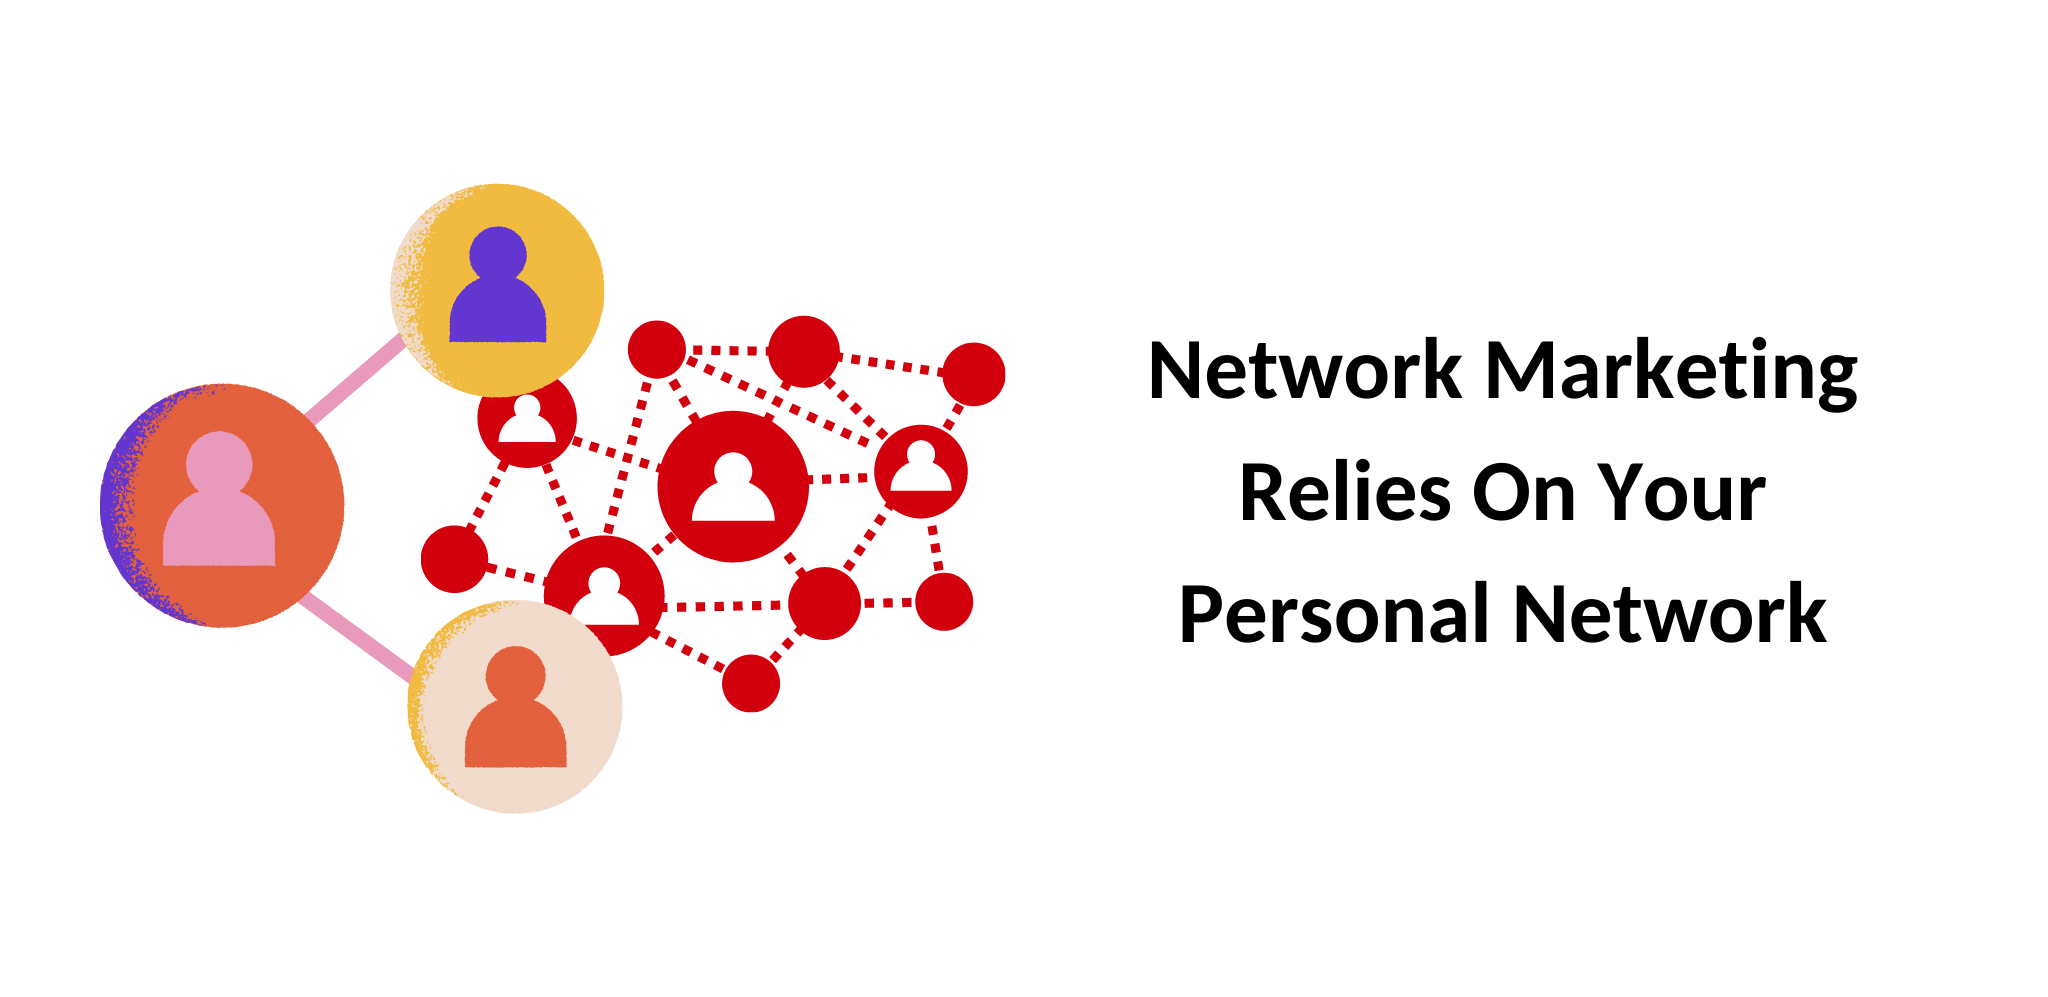 Network Marketing Relies On Your Personal Network